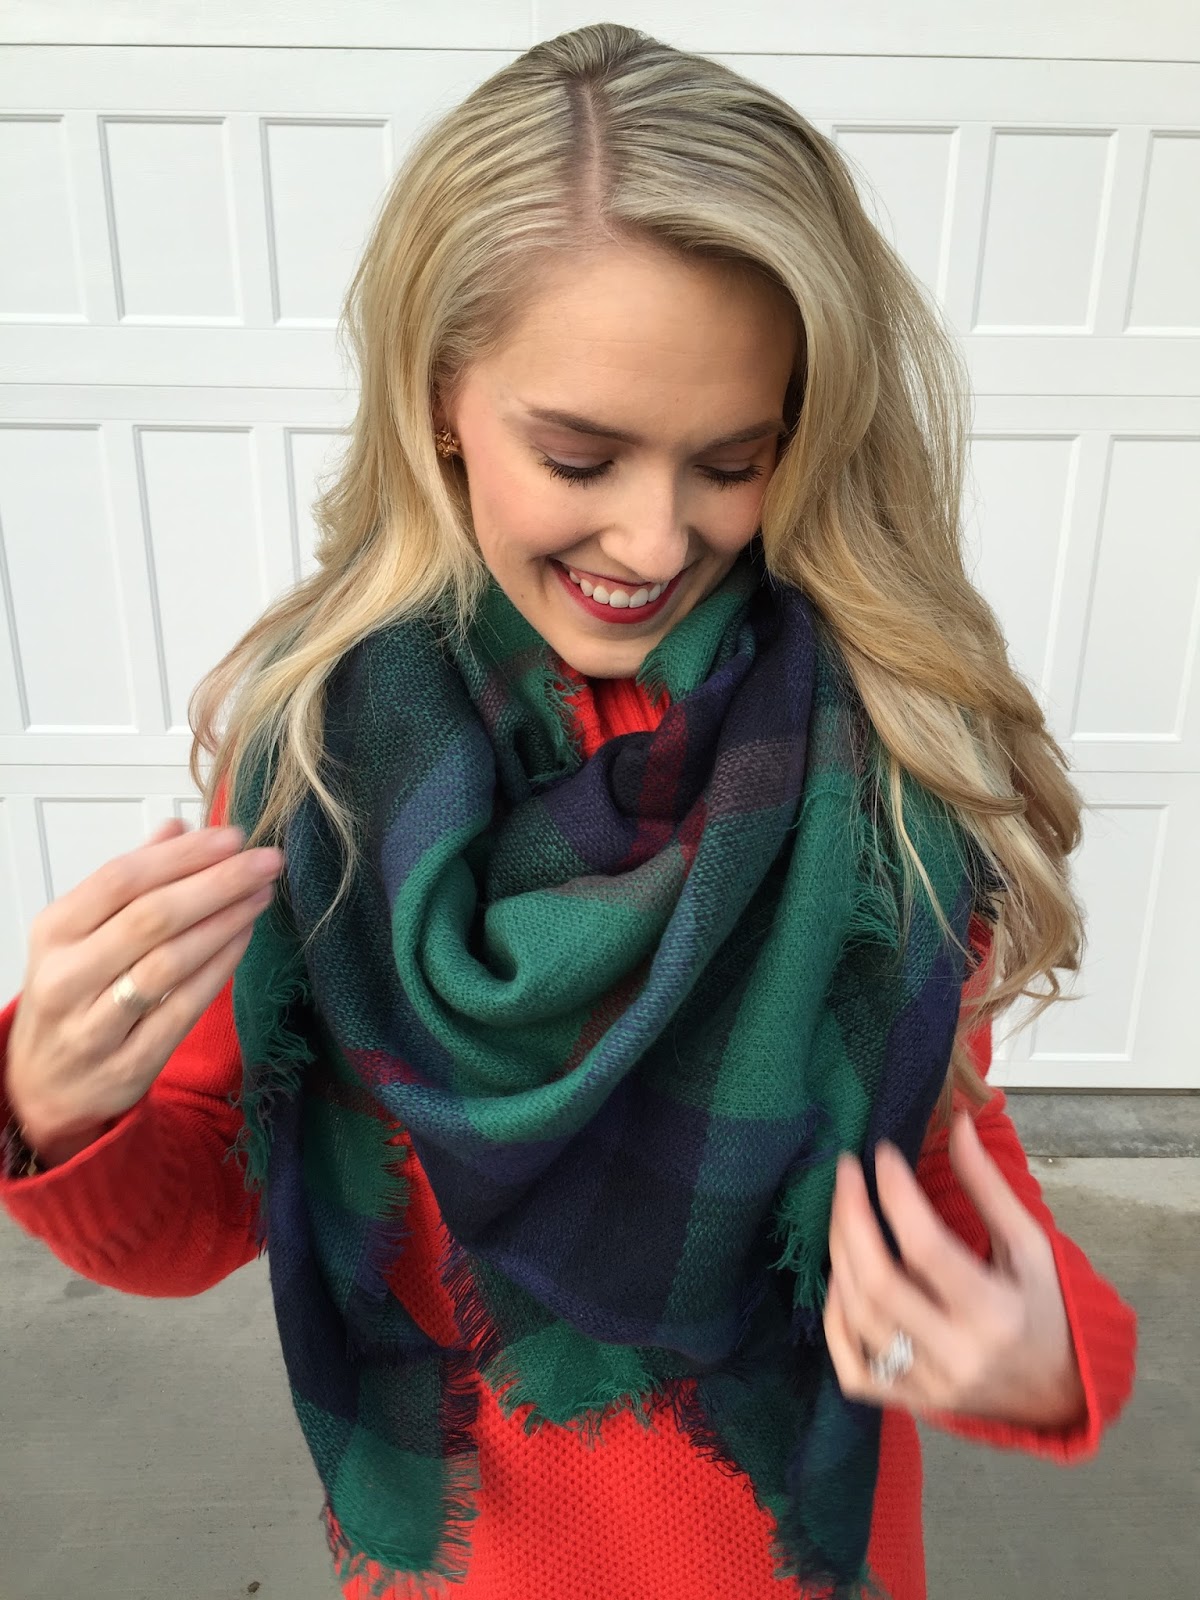 EXCLUSIVE - Blanket Scarves $15.95 + free shipping, reg. $34.95! - A ...